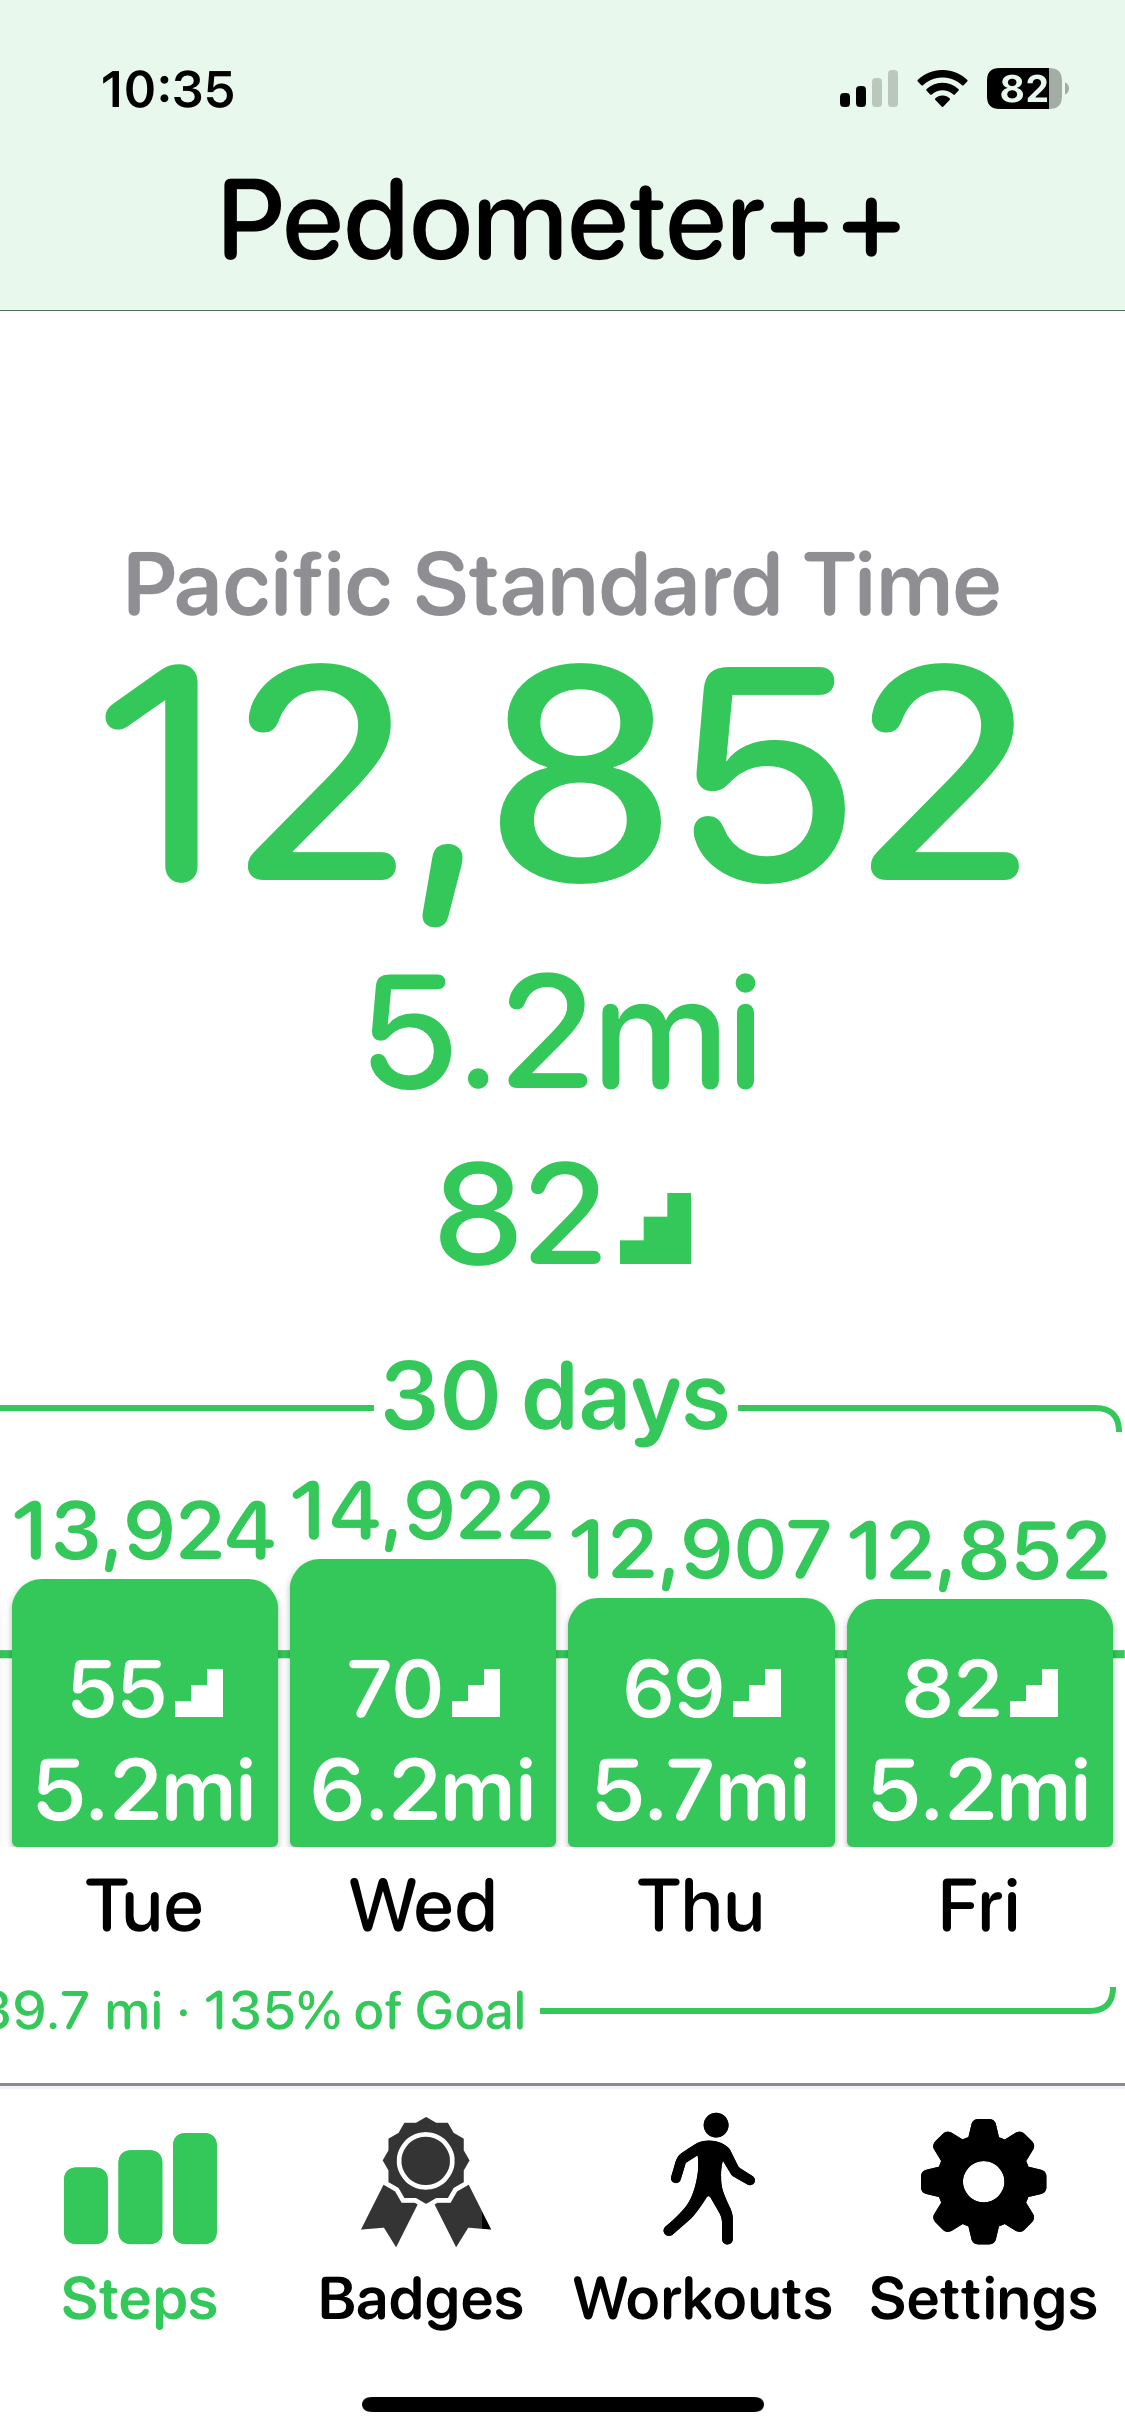 A screenshot showing that I walked at least 10,000 steps on each of the past 30 days.